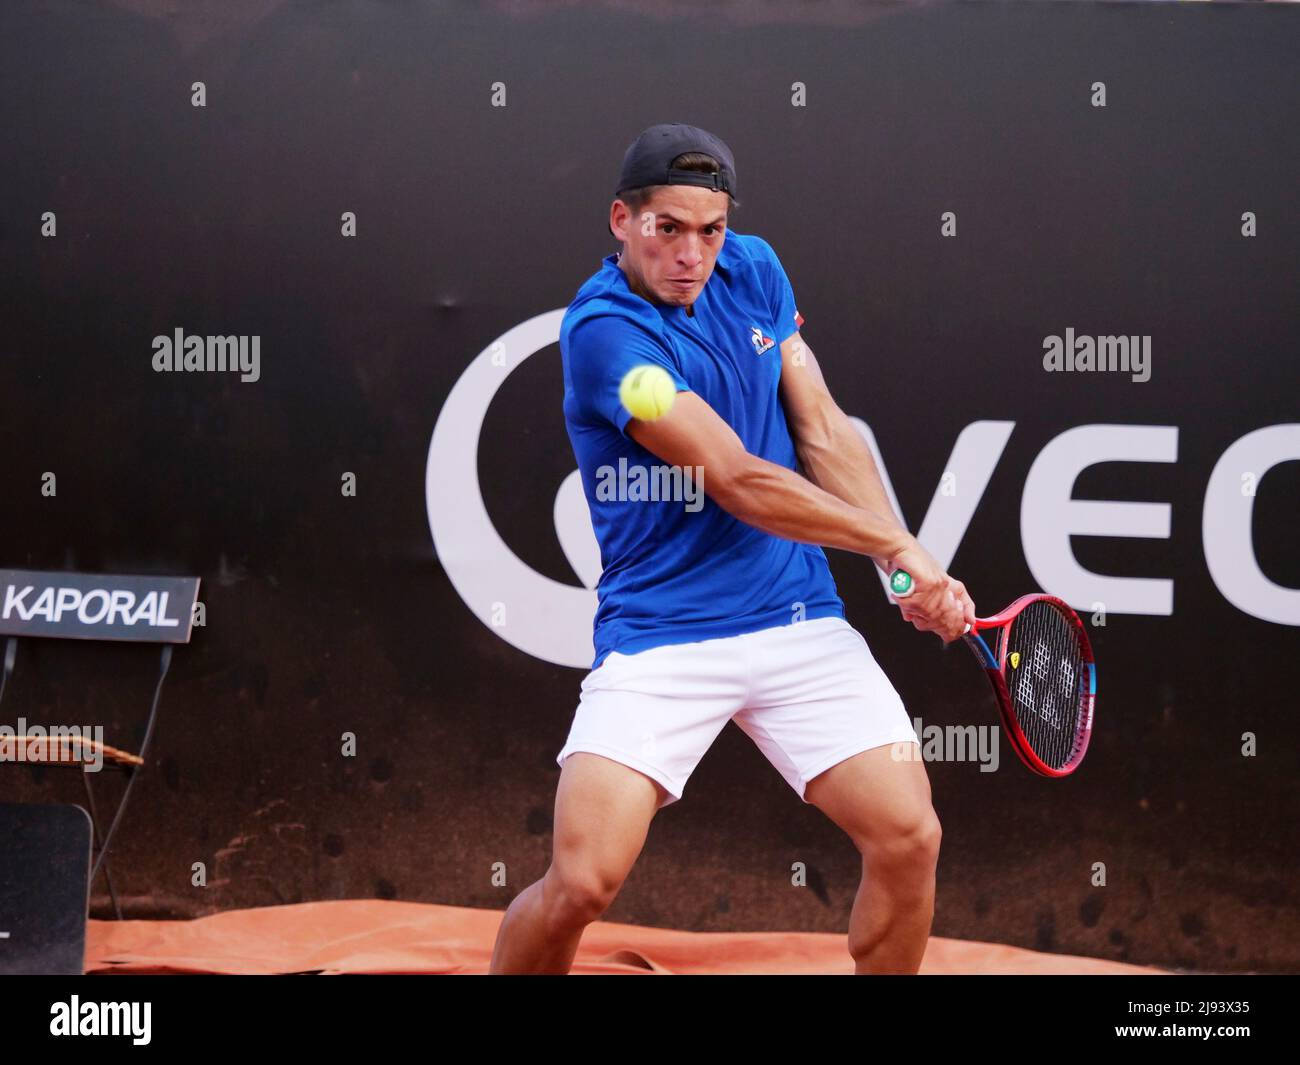 Lyon, France, May 19, 2022, Sebastian Baez (ARG) in action against Cameron  Norrie (GBR) during the quarter-finals at the Open Parc  Auvergne-Rhone-Alpes Lyon 2022, ATP 250 Tennis tournament on May 19, 2022